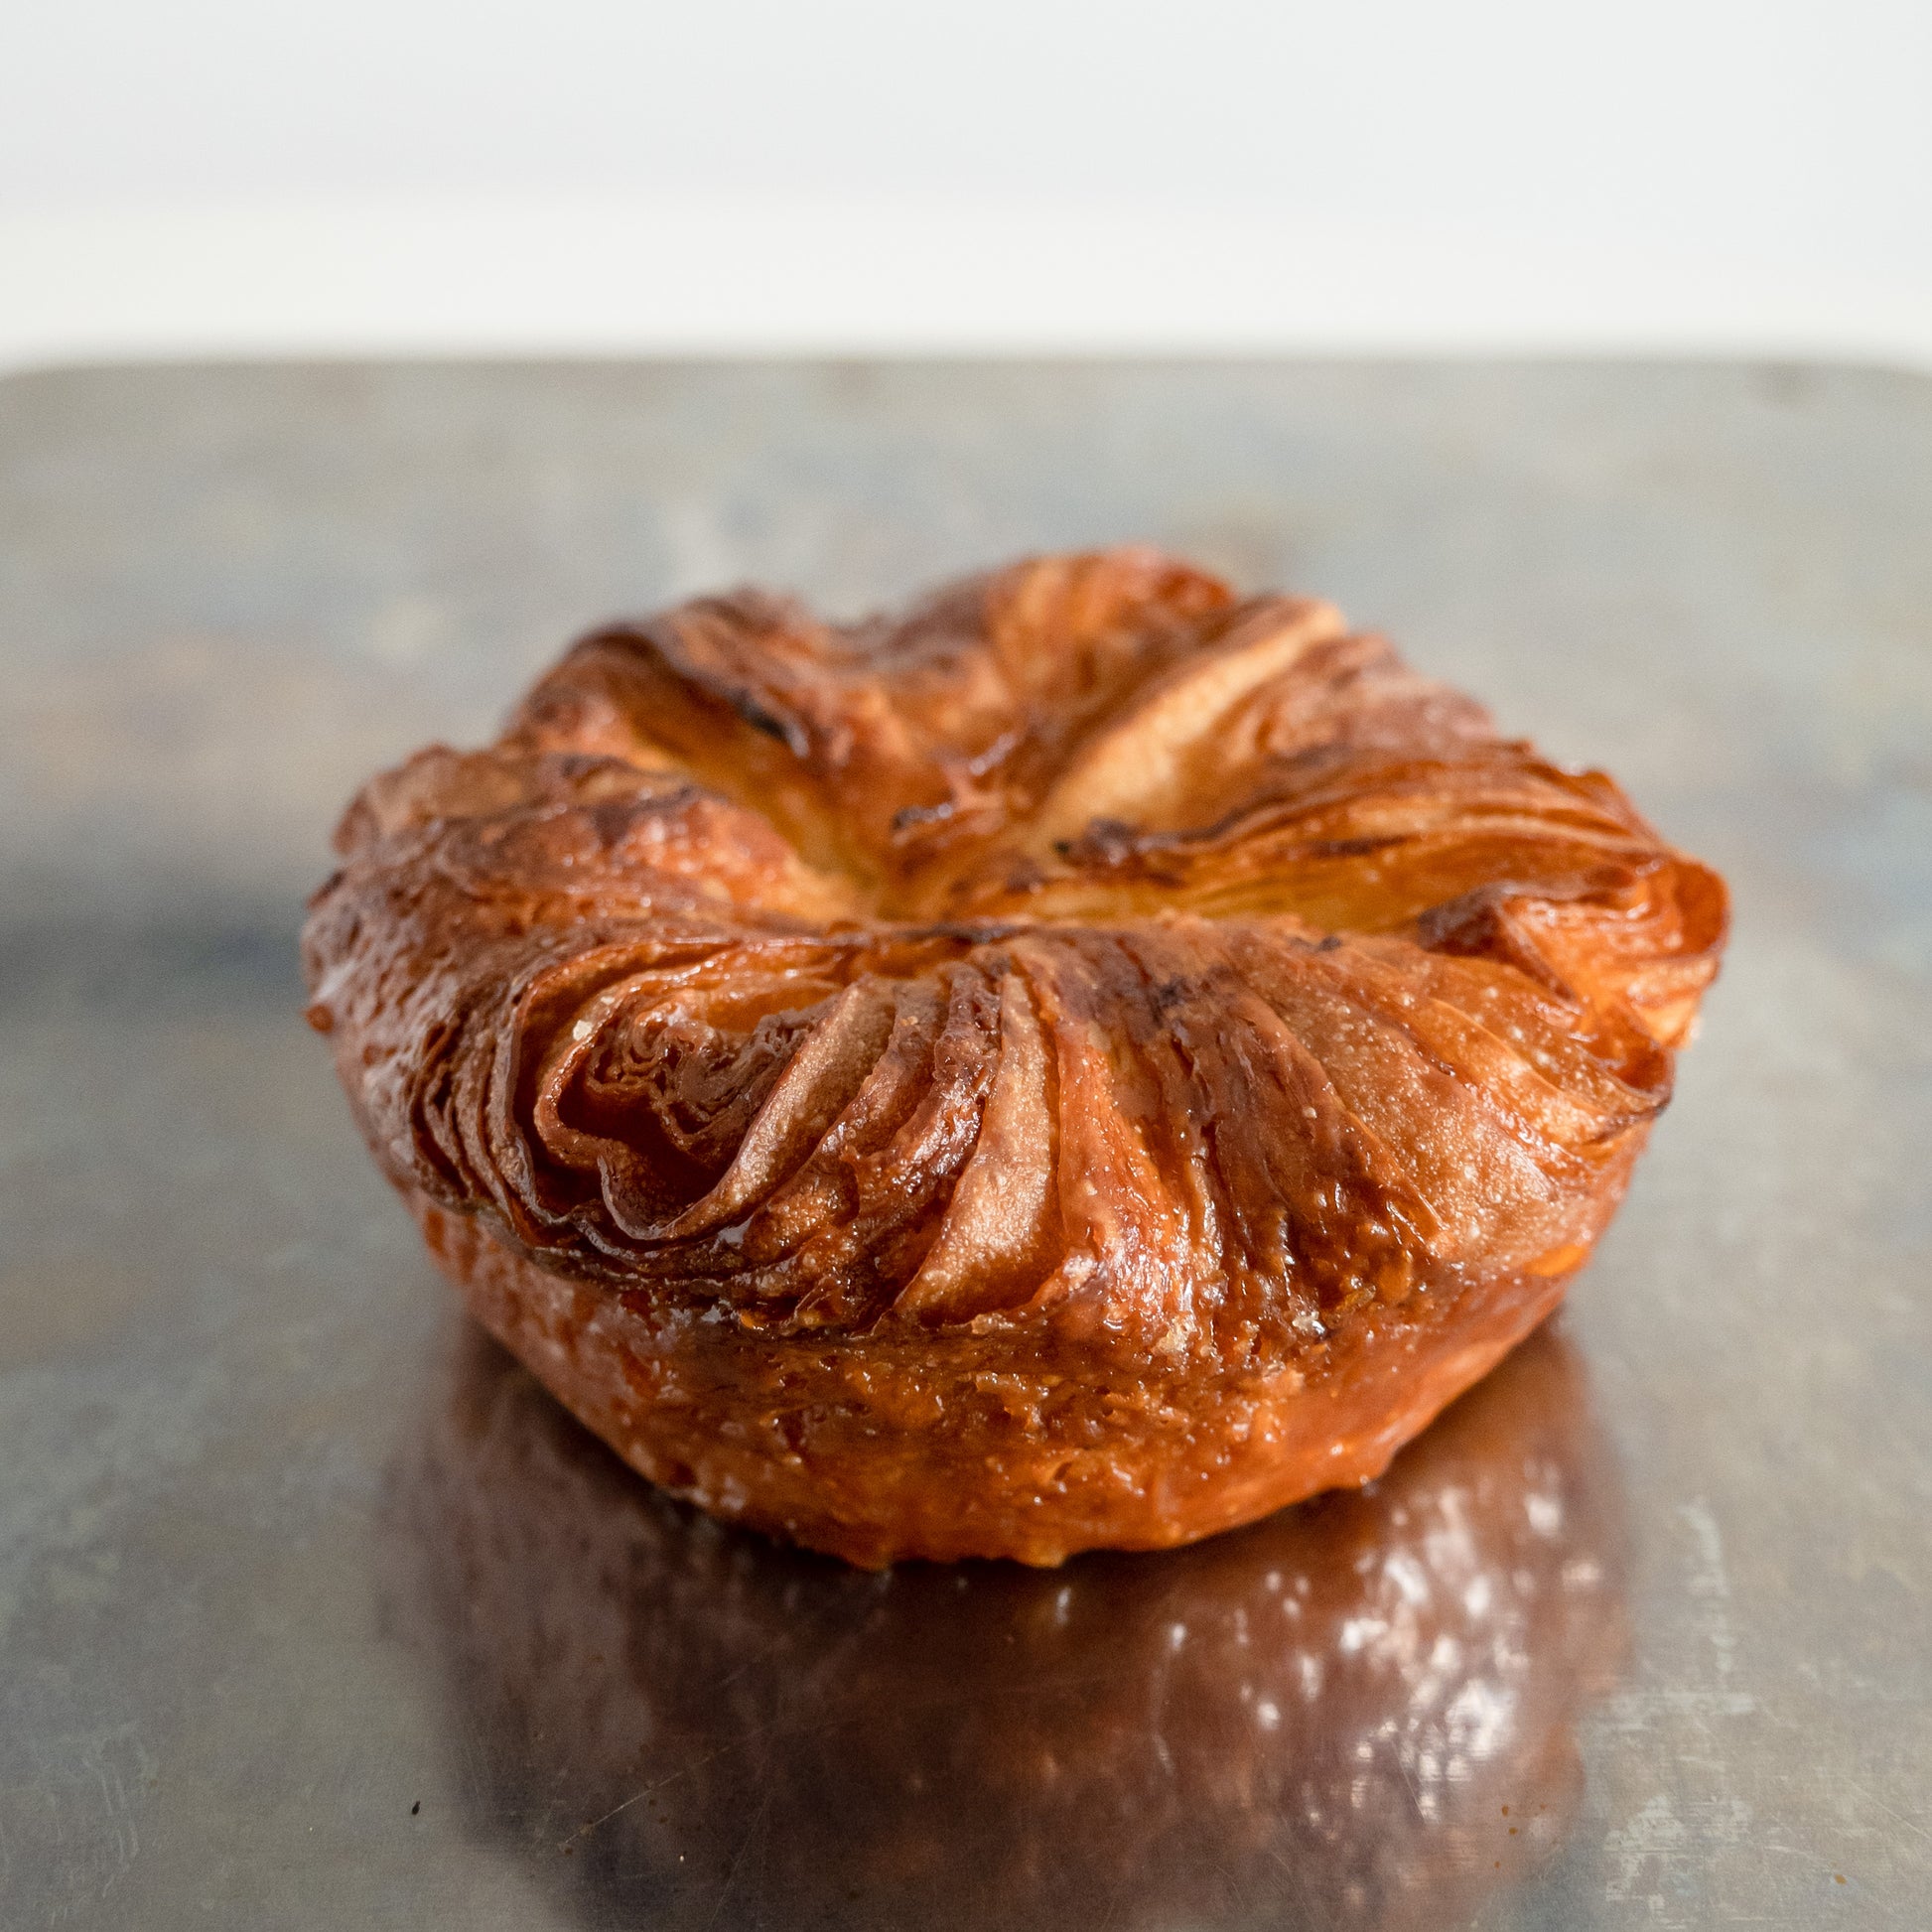 Kouign Amann - A traditional Breton pastry made with layers of buttery croissant dough, sugar, and a hint of sea salt, caramelized to perfection. The result is a crispy, flaky, and irresistibly buttery pastry with a slightly sweet, caramelized flavor.